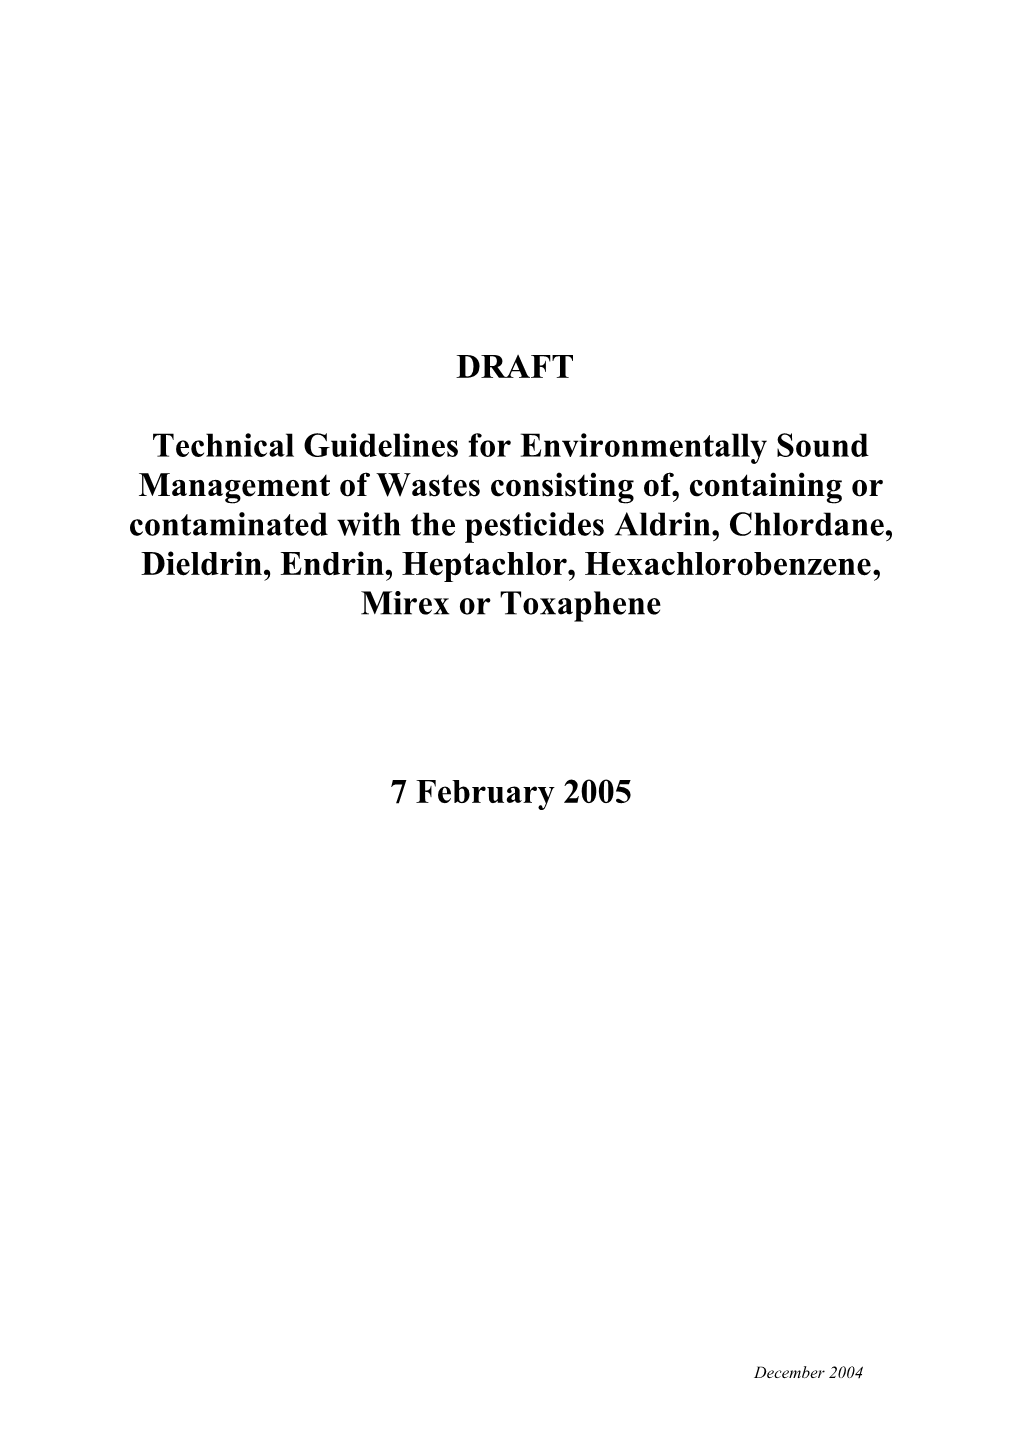 Technical Guidelines for Environmentally Sound Management Ofwastes Consisting Of, Containing